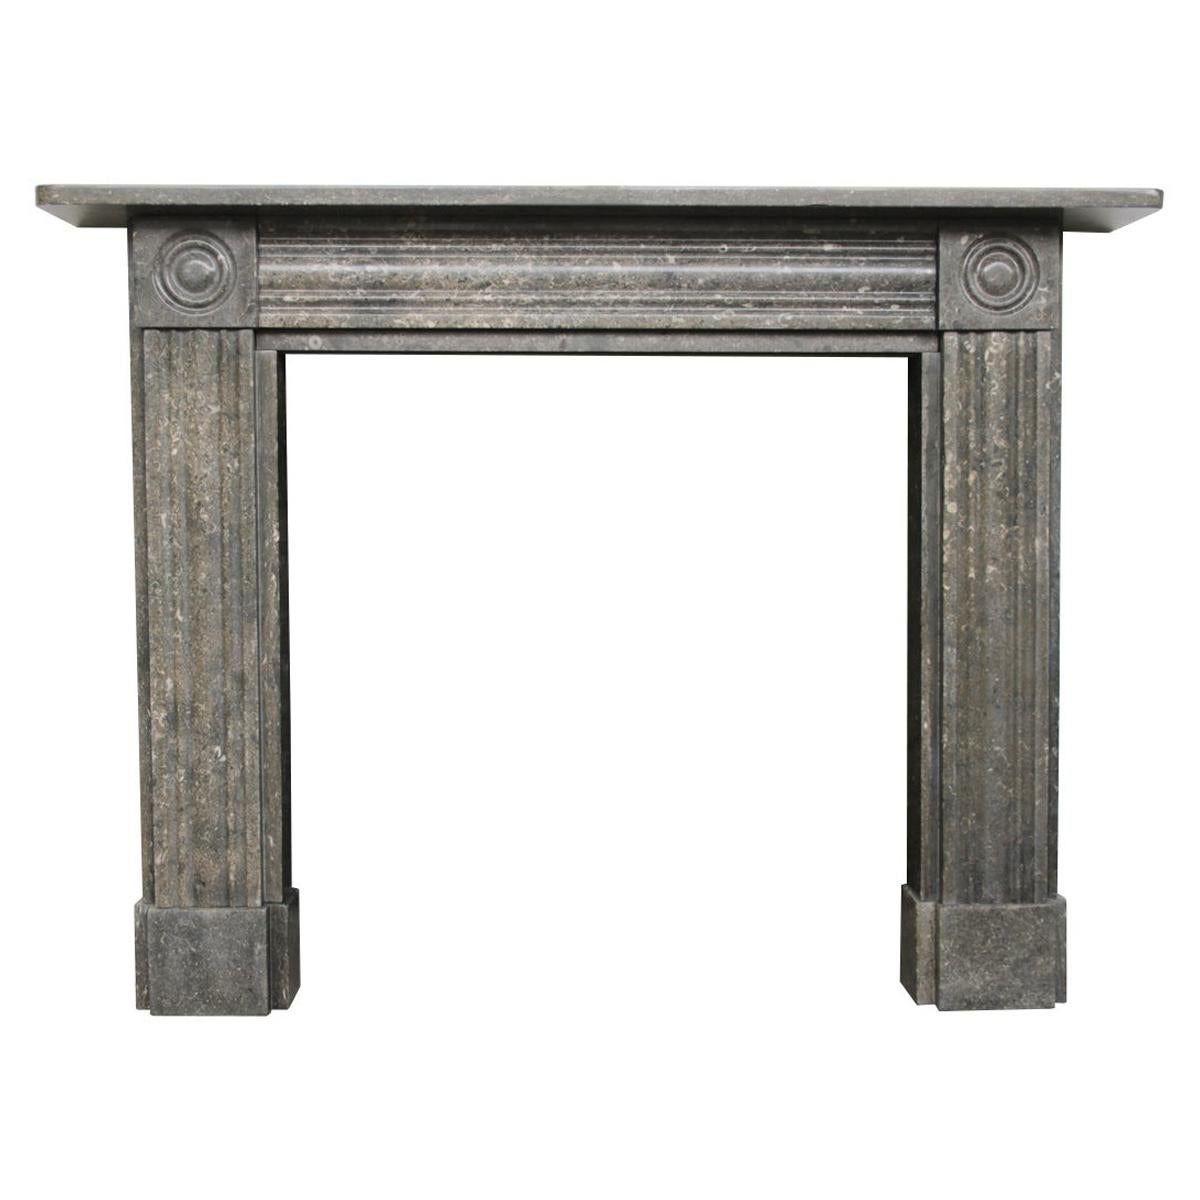 Antique Regency Fossil Marble Fire Surround